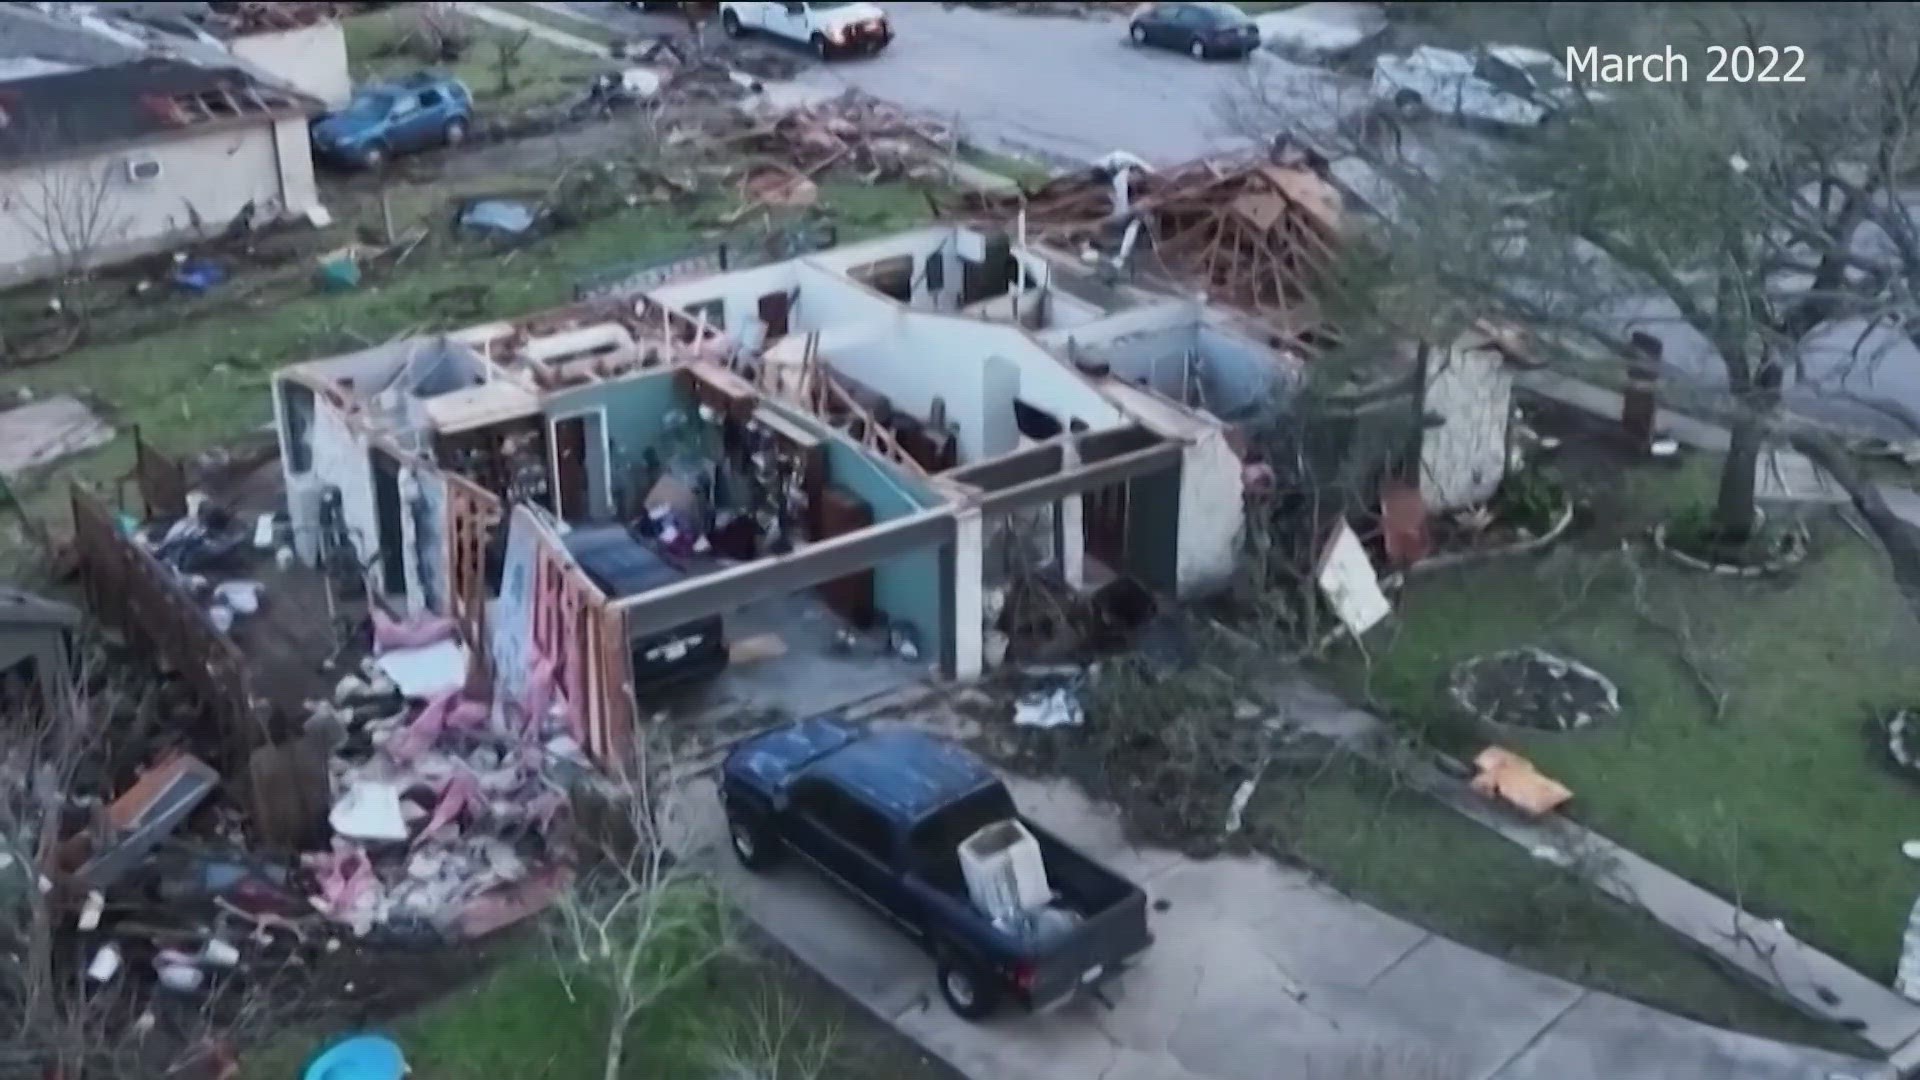 One of the homes impacted belonged to Michael Talamantez, who said he was at home when the tornado came through.